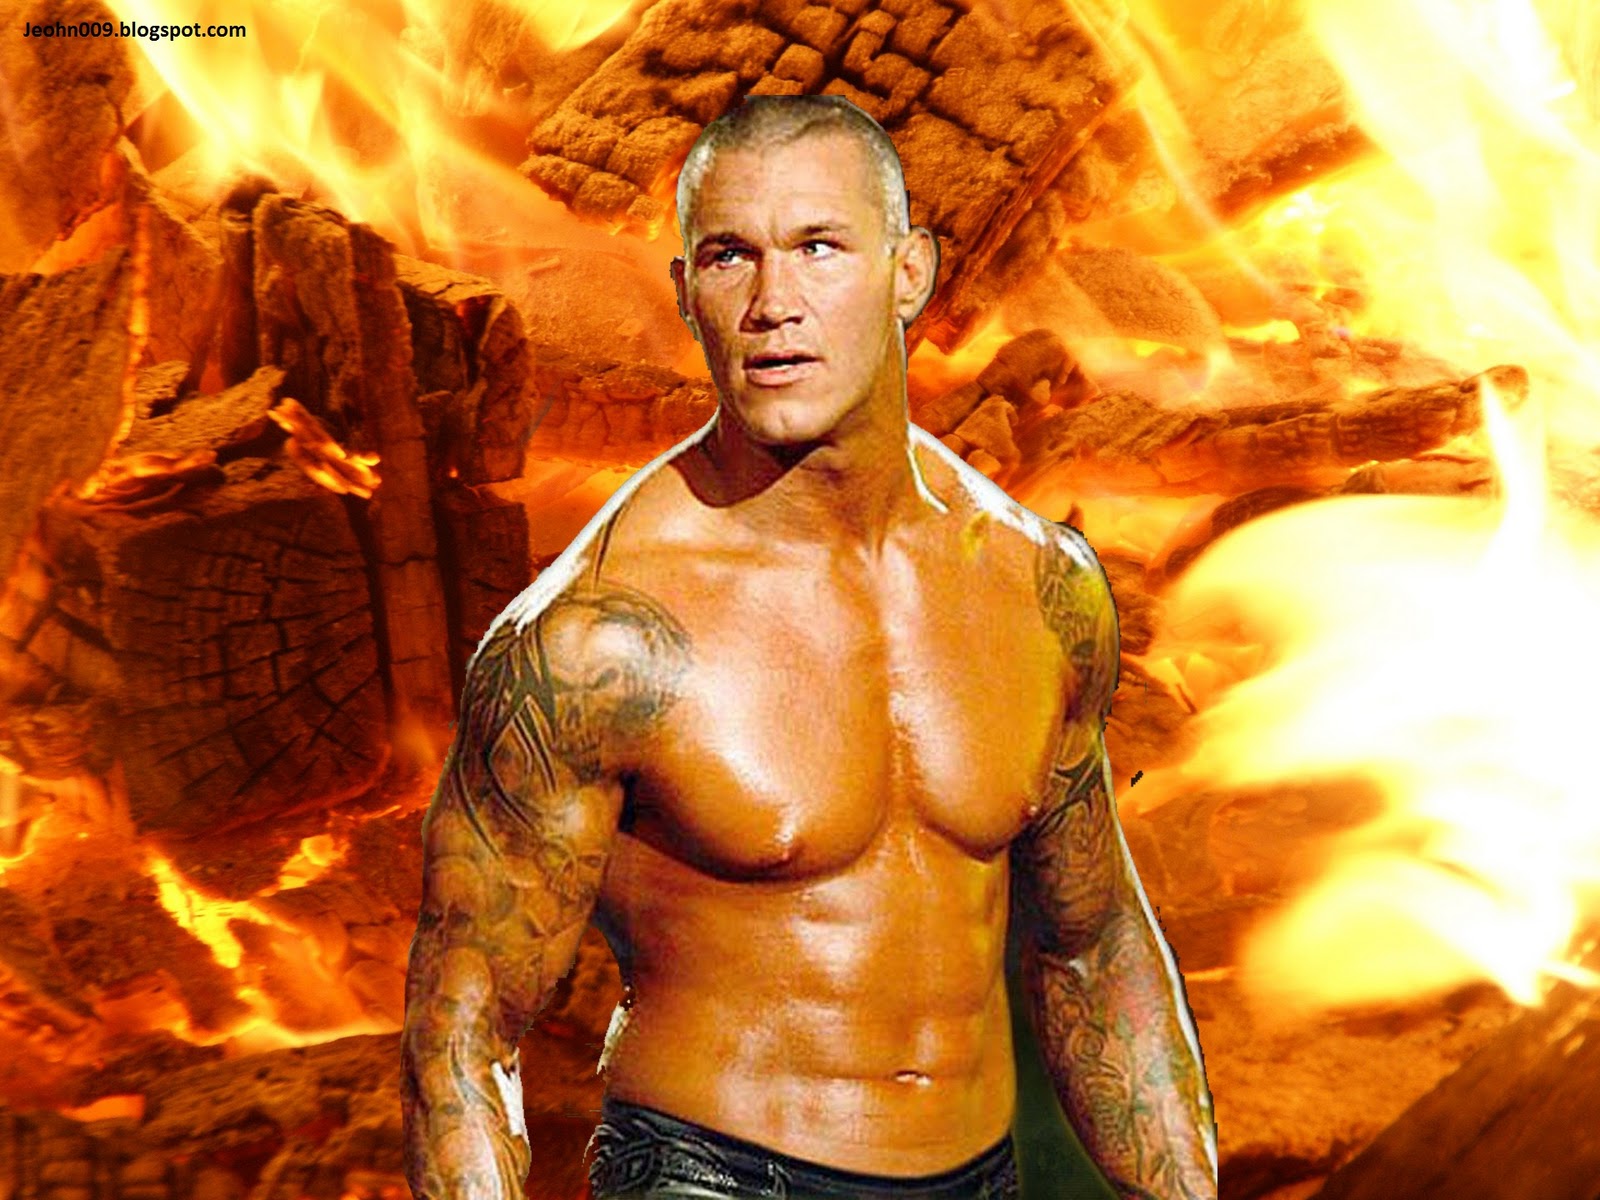 wwe randy orton wallpaper,muscle,human,action film,barechested,human torch